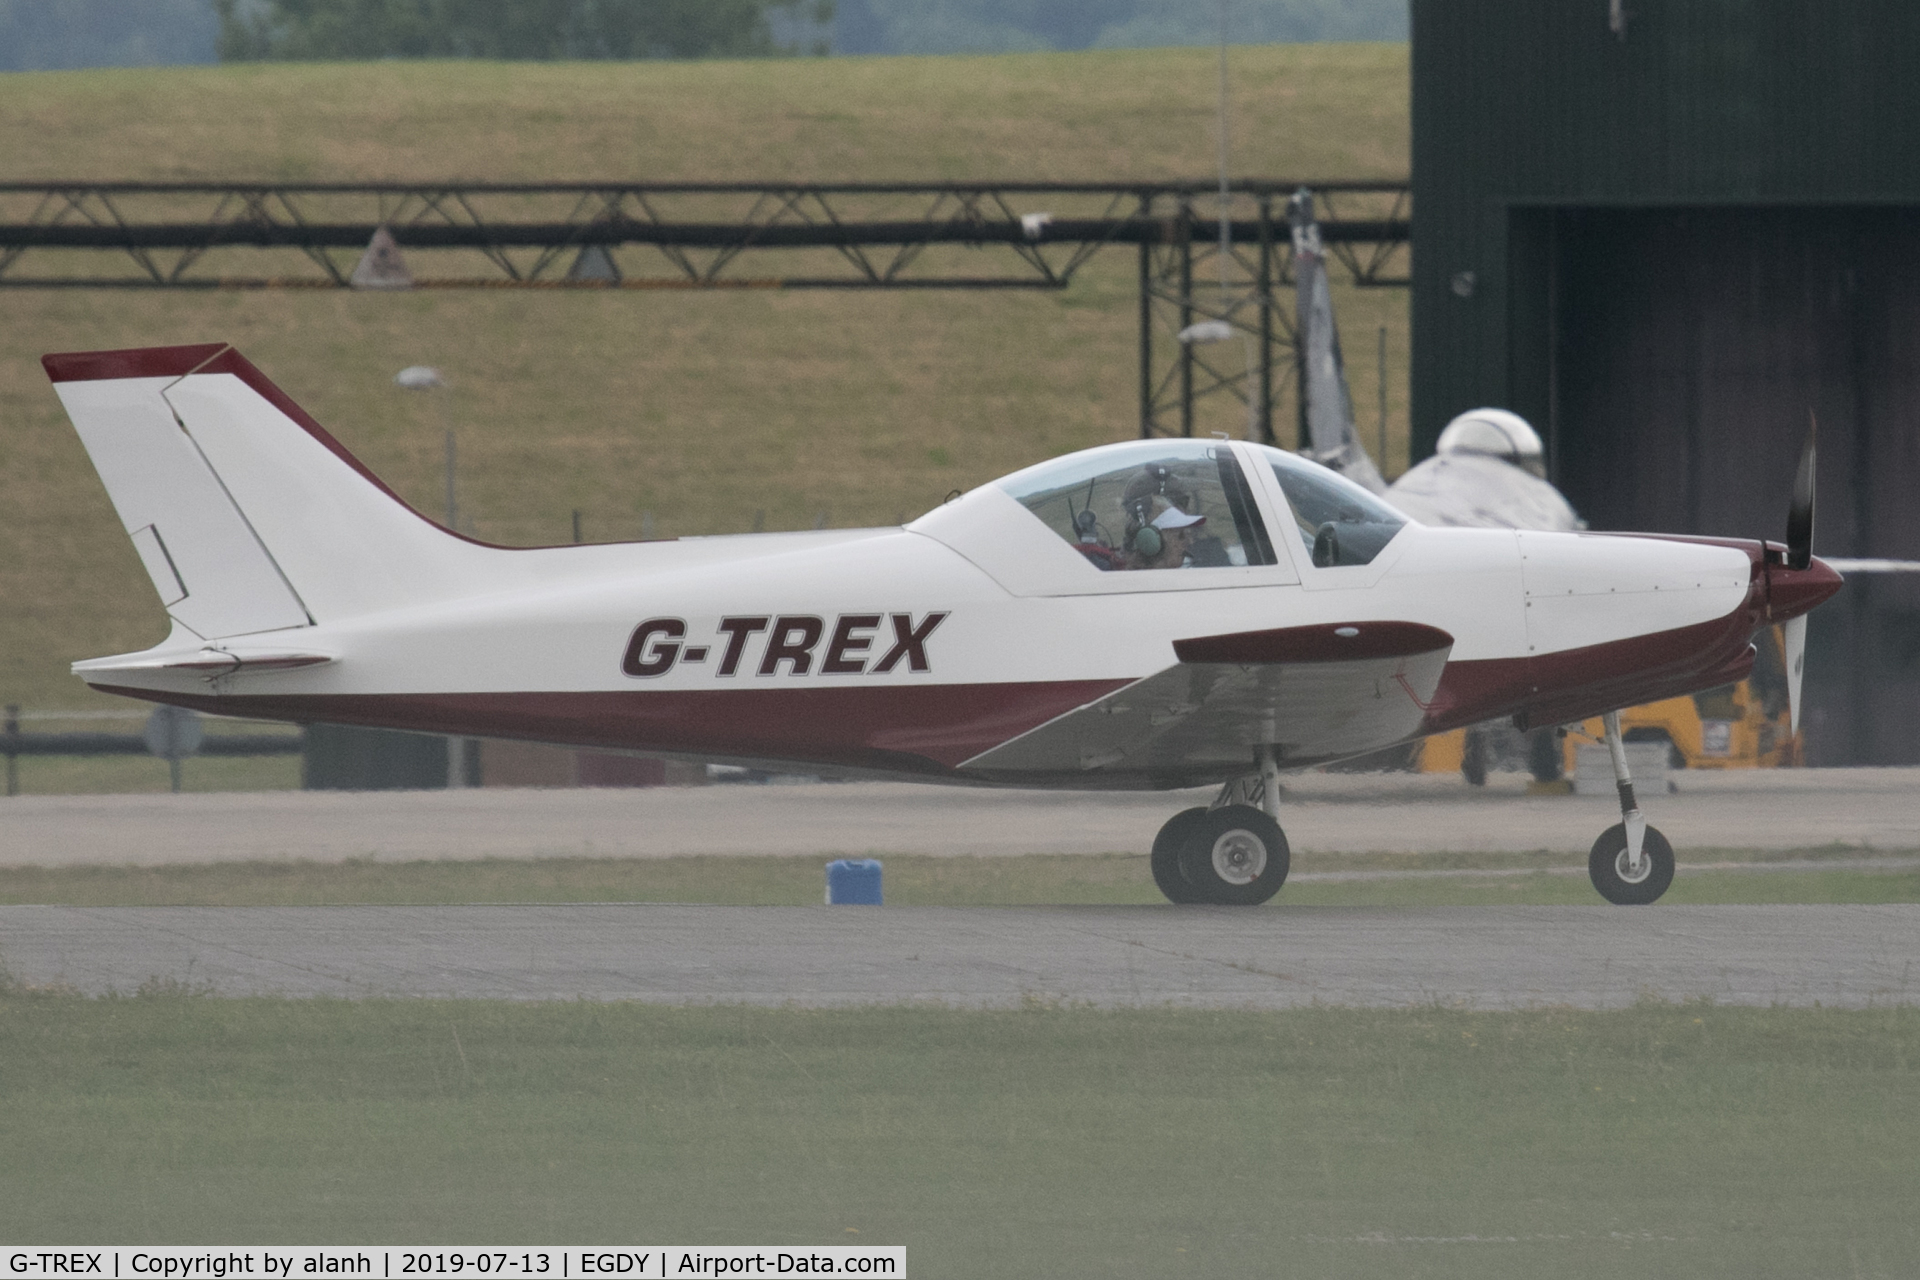 G-TREX, 2006 Alpi Aviation Pioneer 300 C/N PFA 330-14305, Rolling past the parked Belgian F-16, after arrival as a visitor at the 2019 Yeovilton Air Day